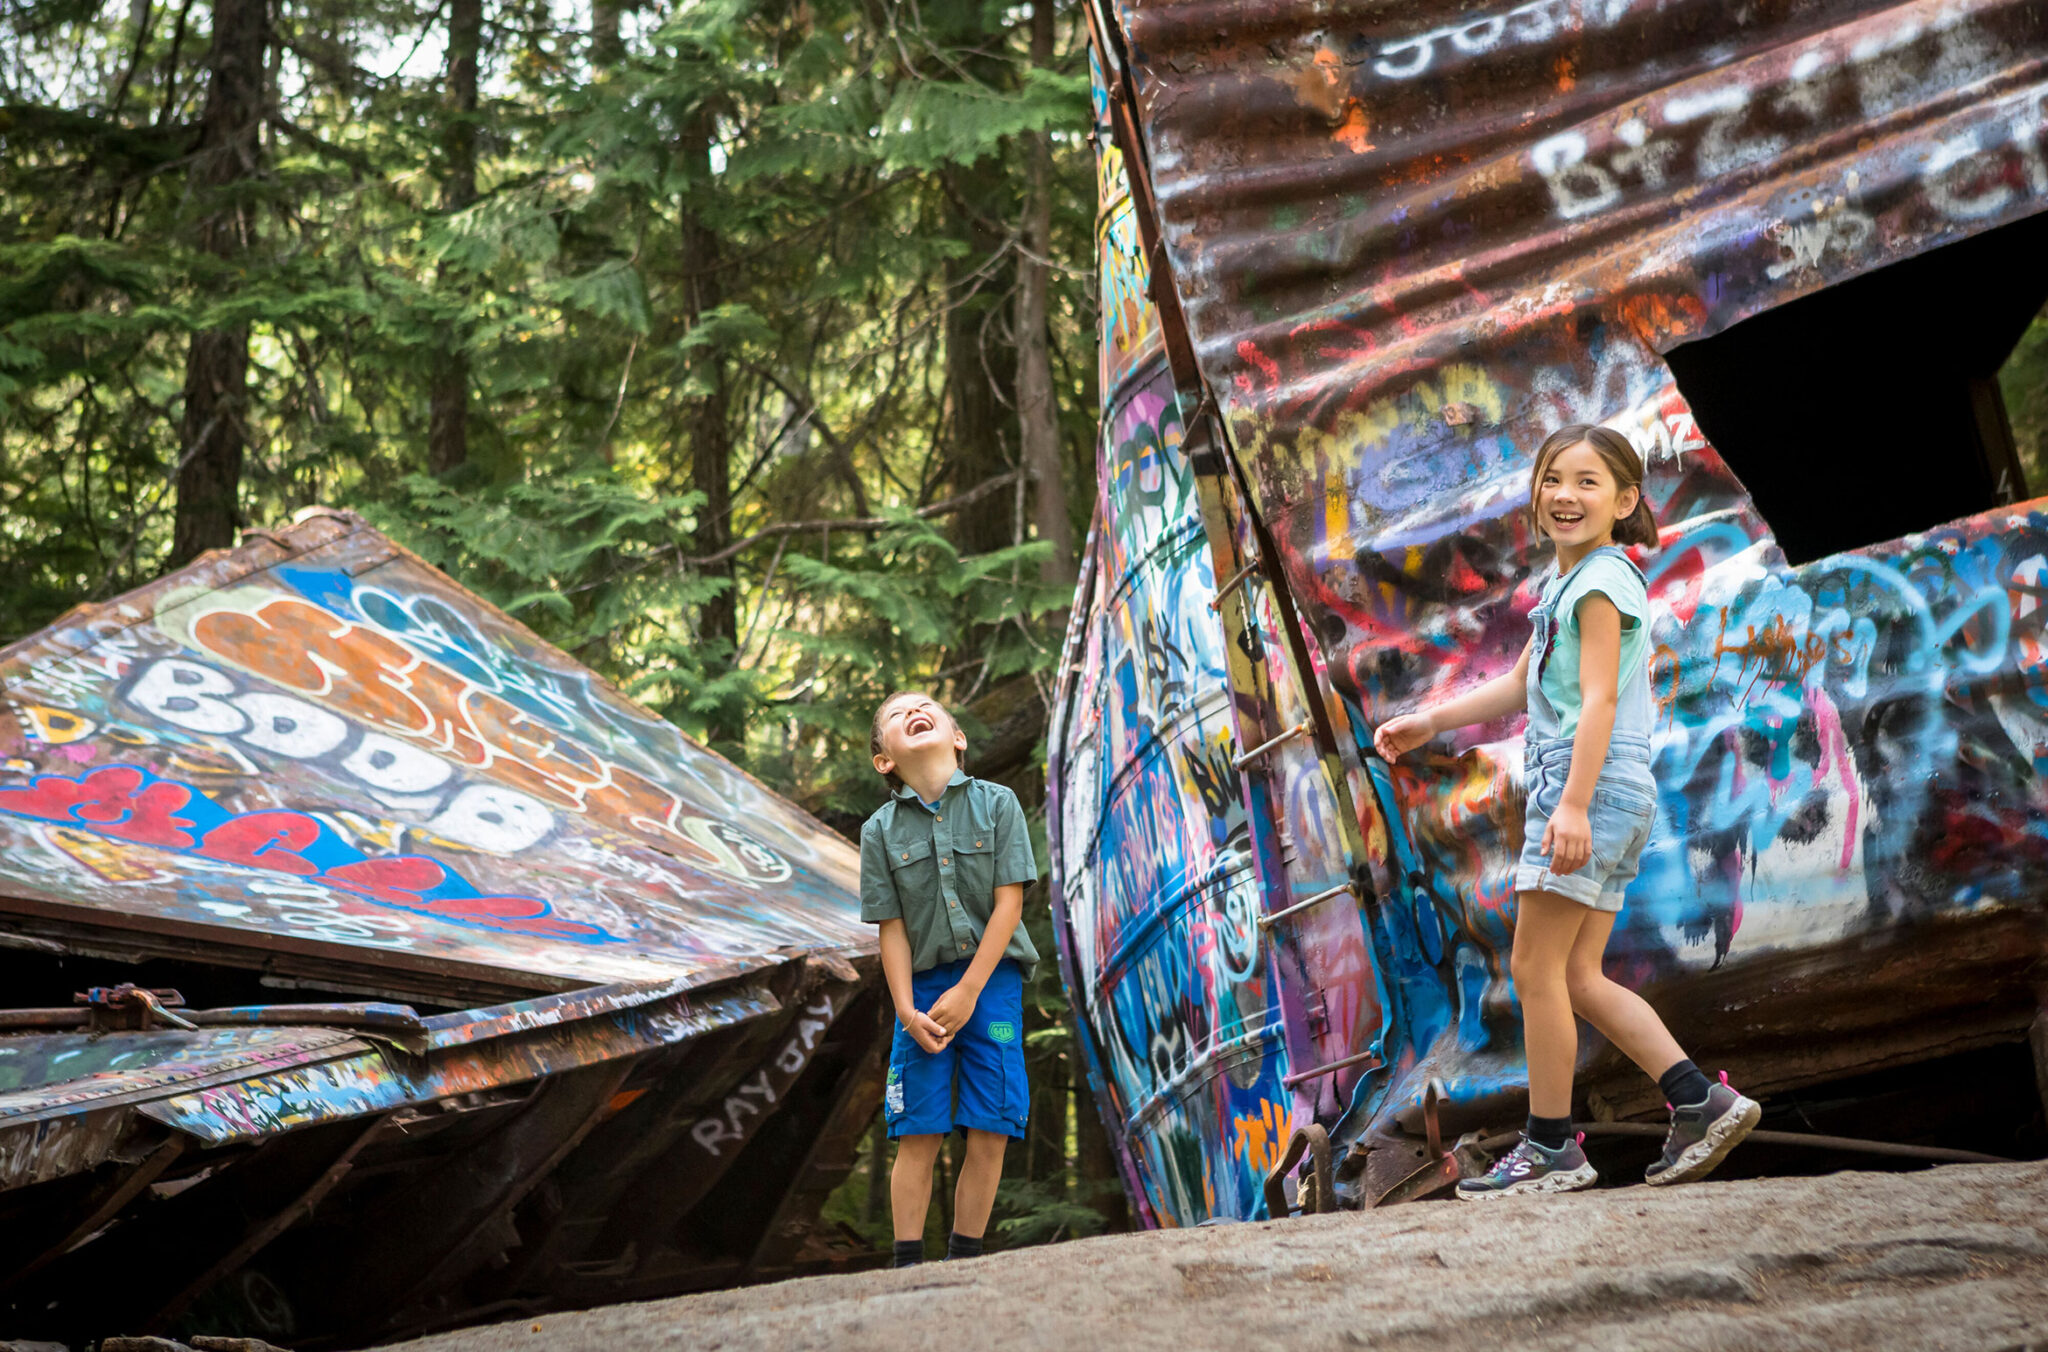 Two kids explore the train wreck in Whistler.